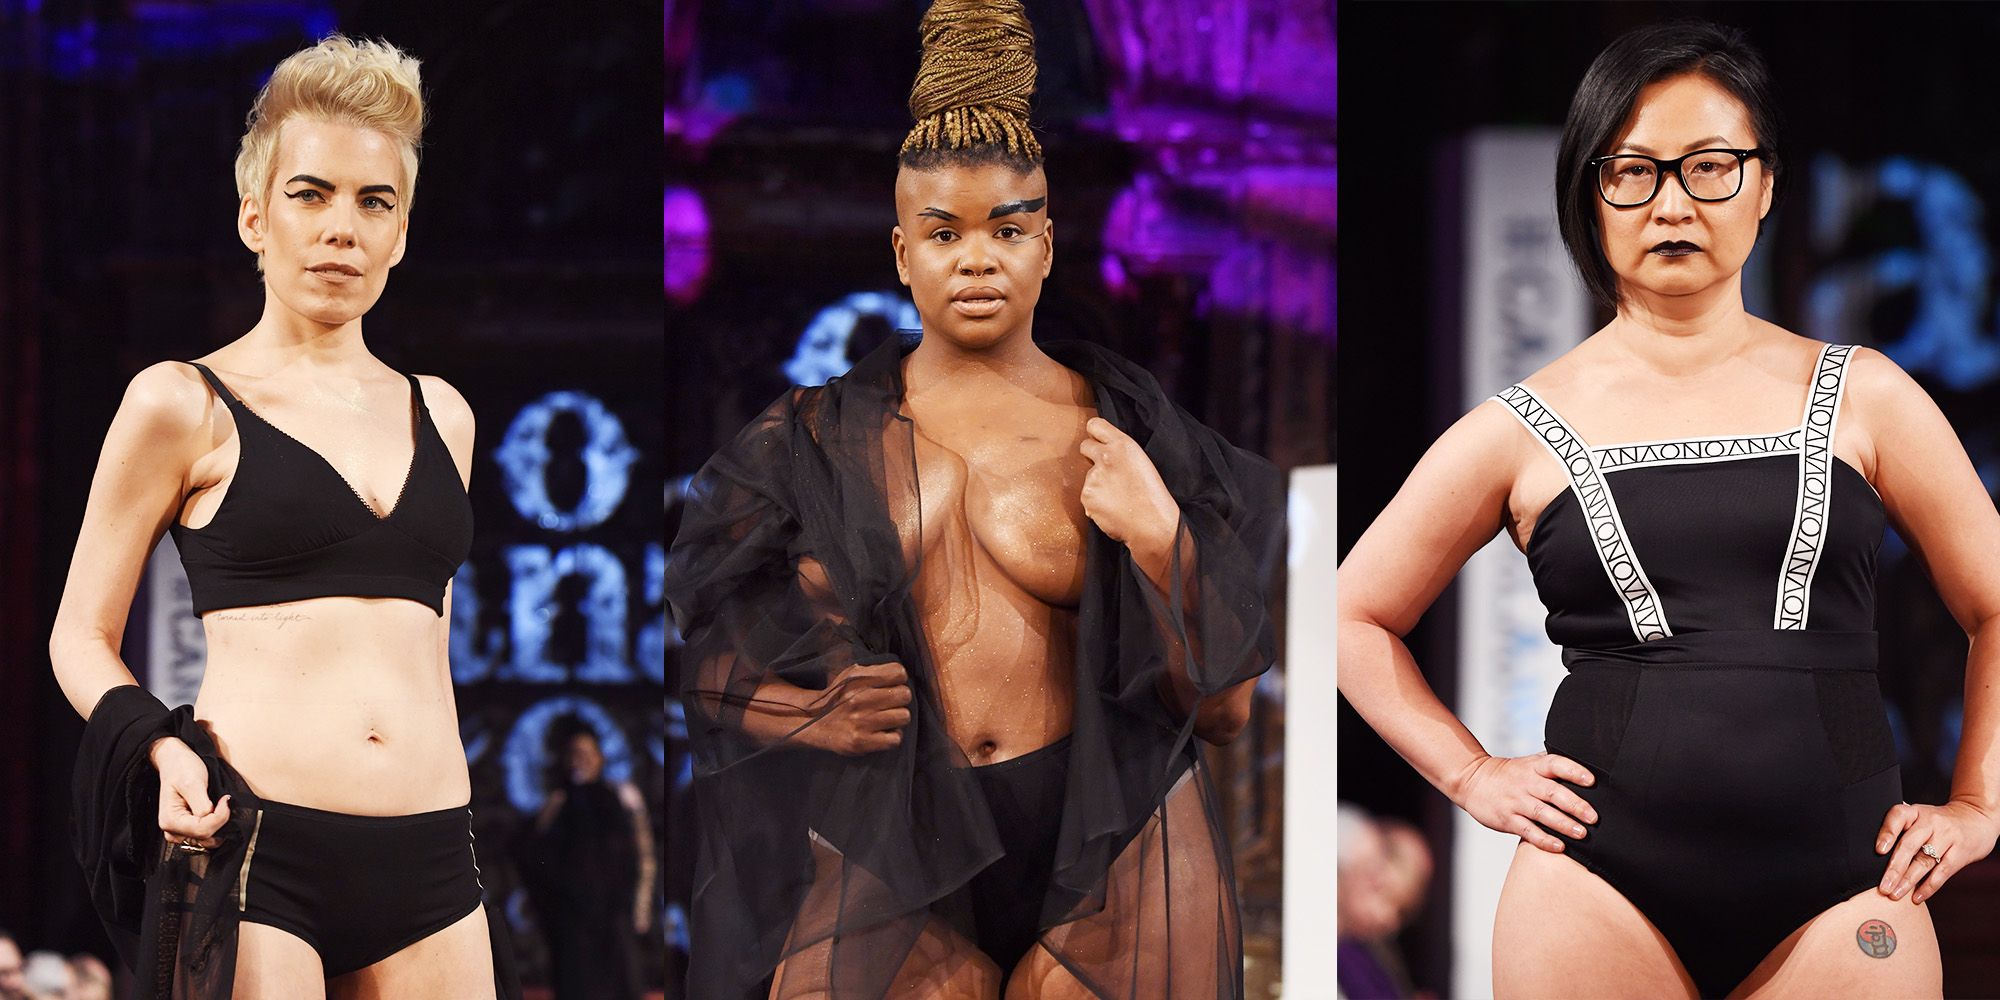 Every Model in This Fashion Show Is Living With Breast Cancer